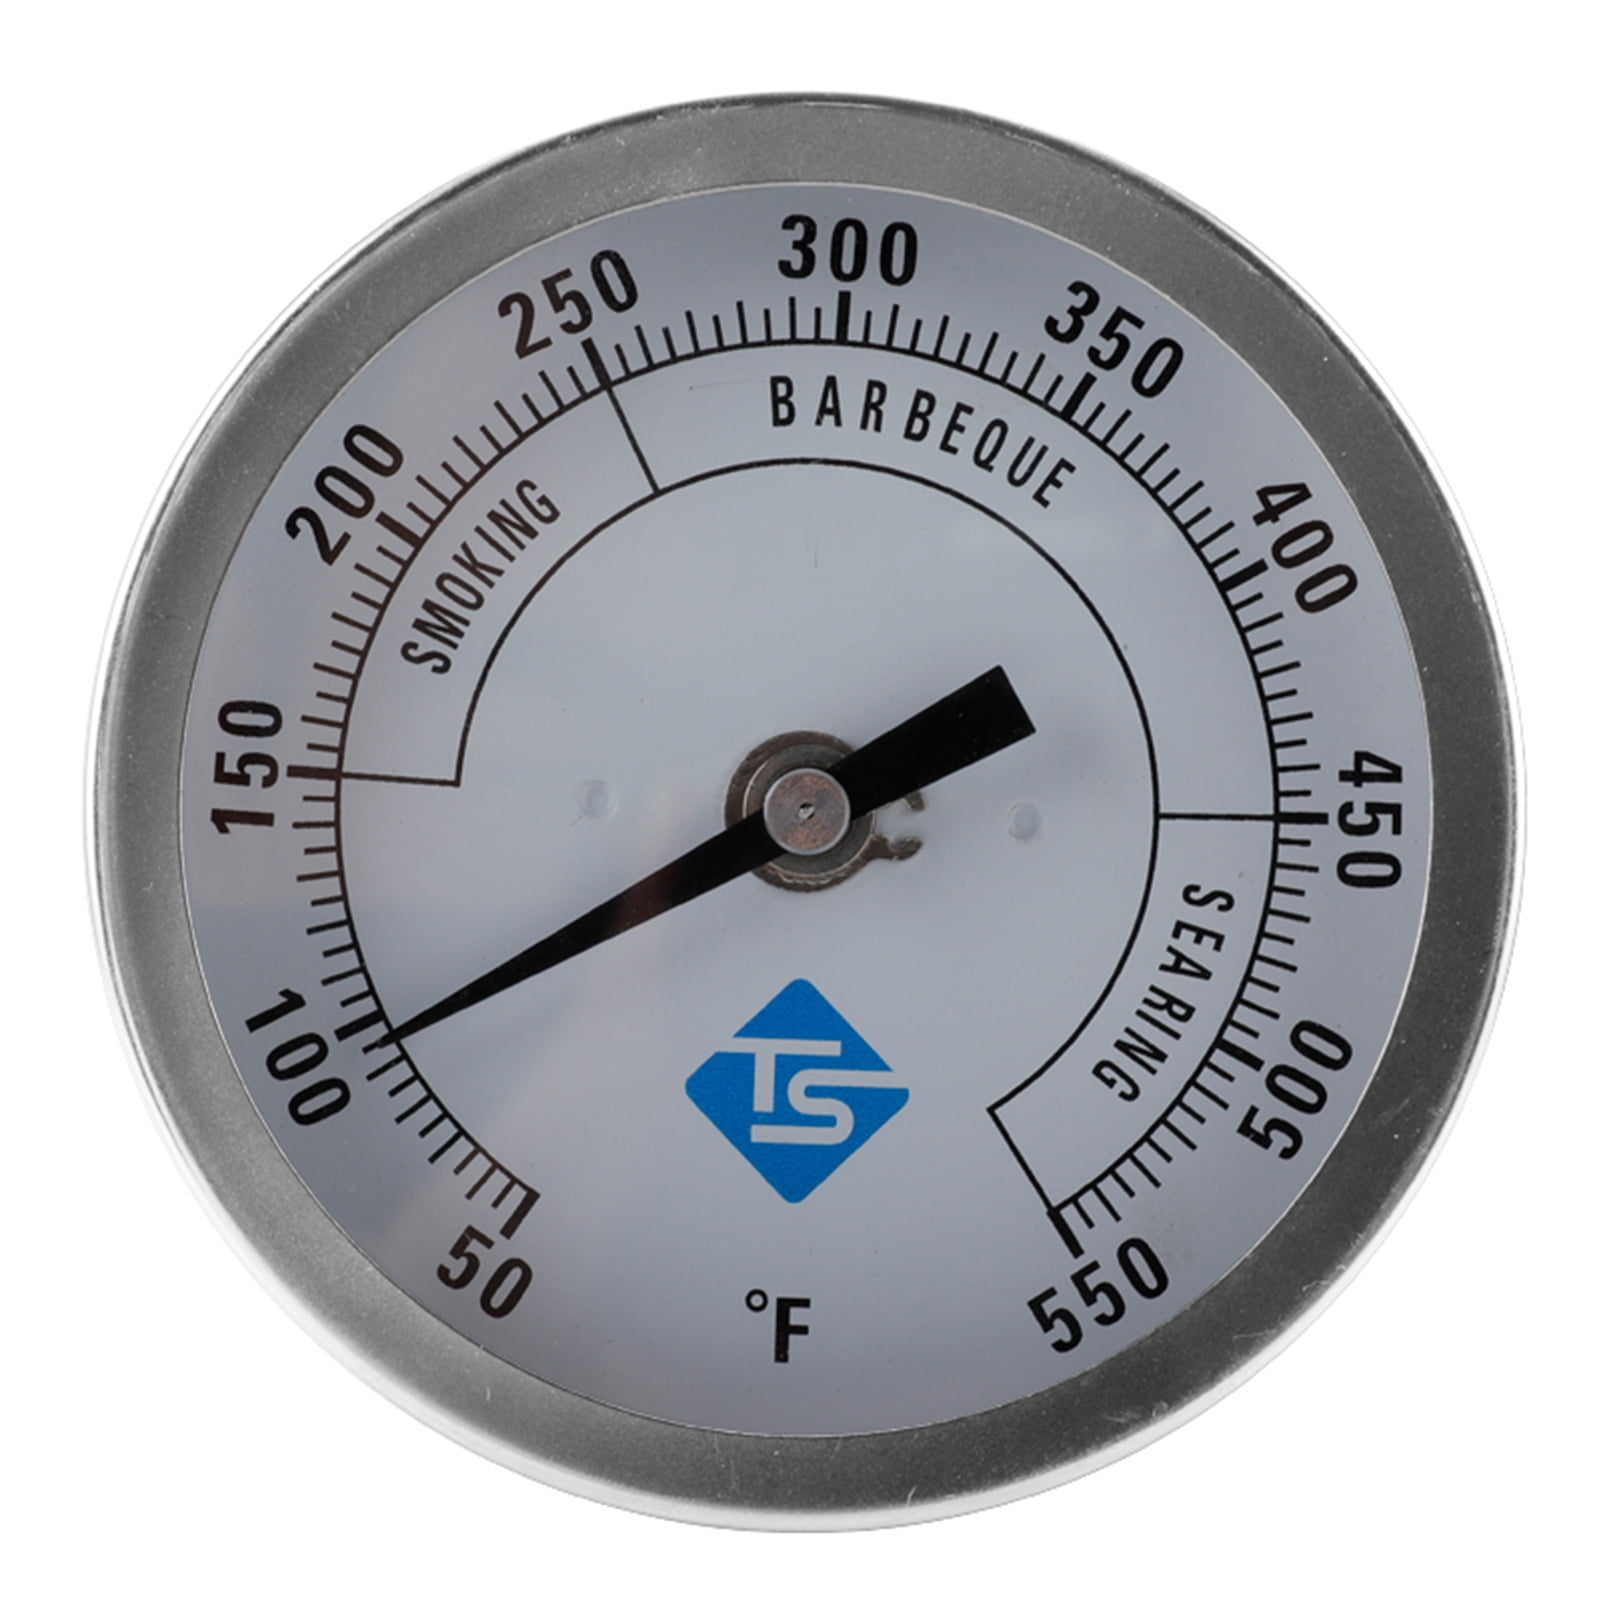 Outdoor Temperature Gauge Thermometer Food Stainless Steel 50-550℉ New 